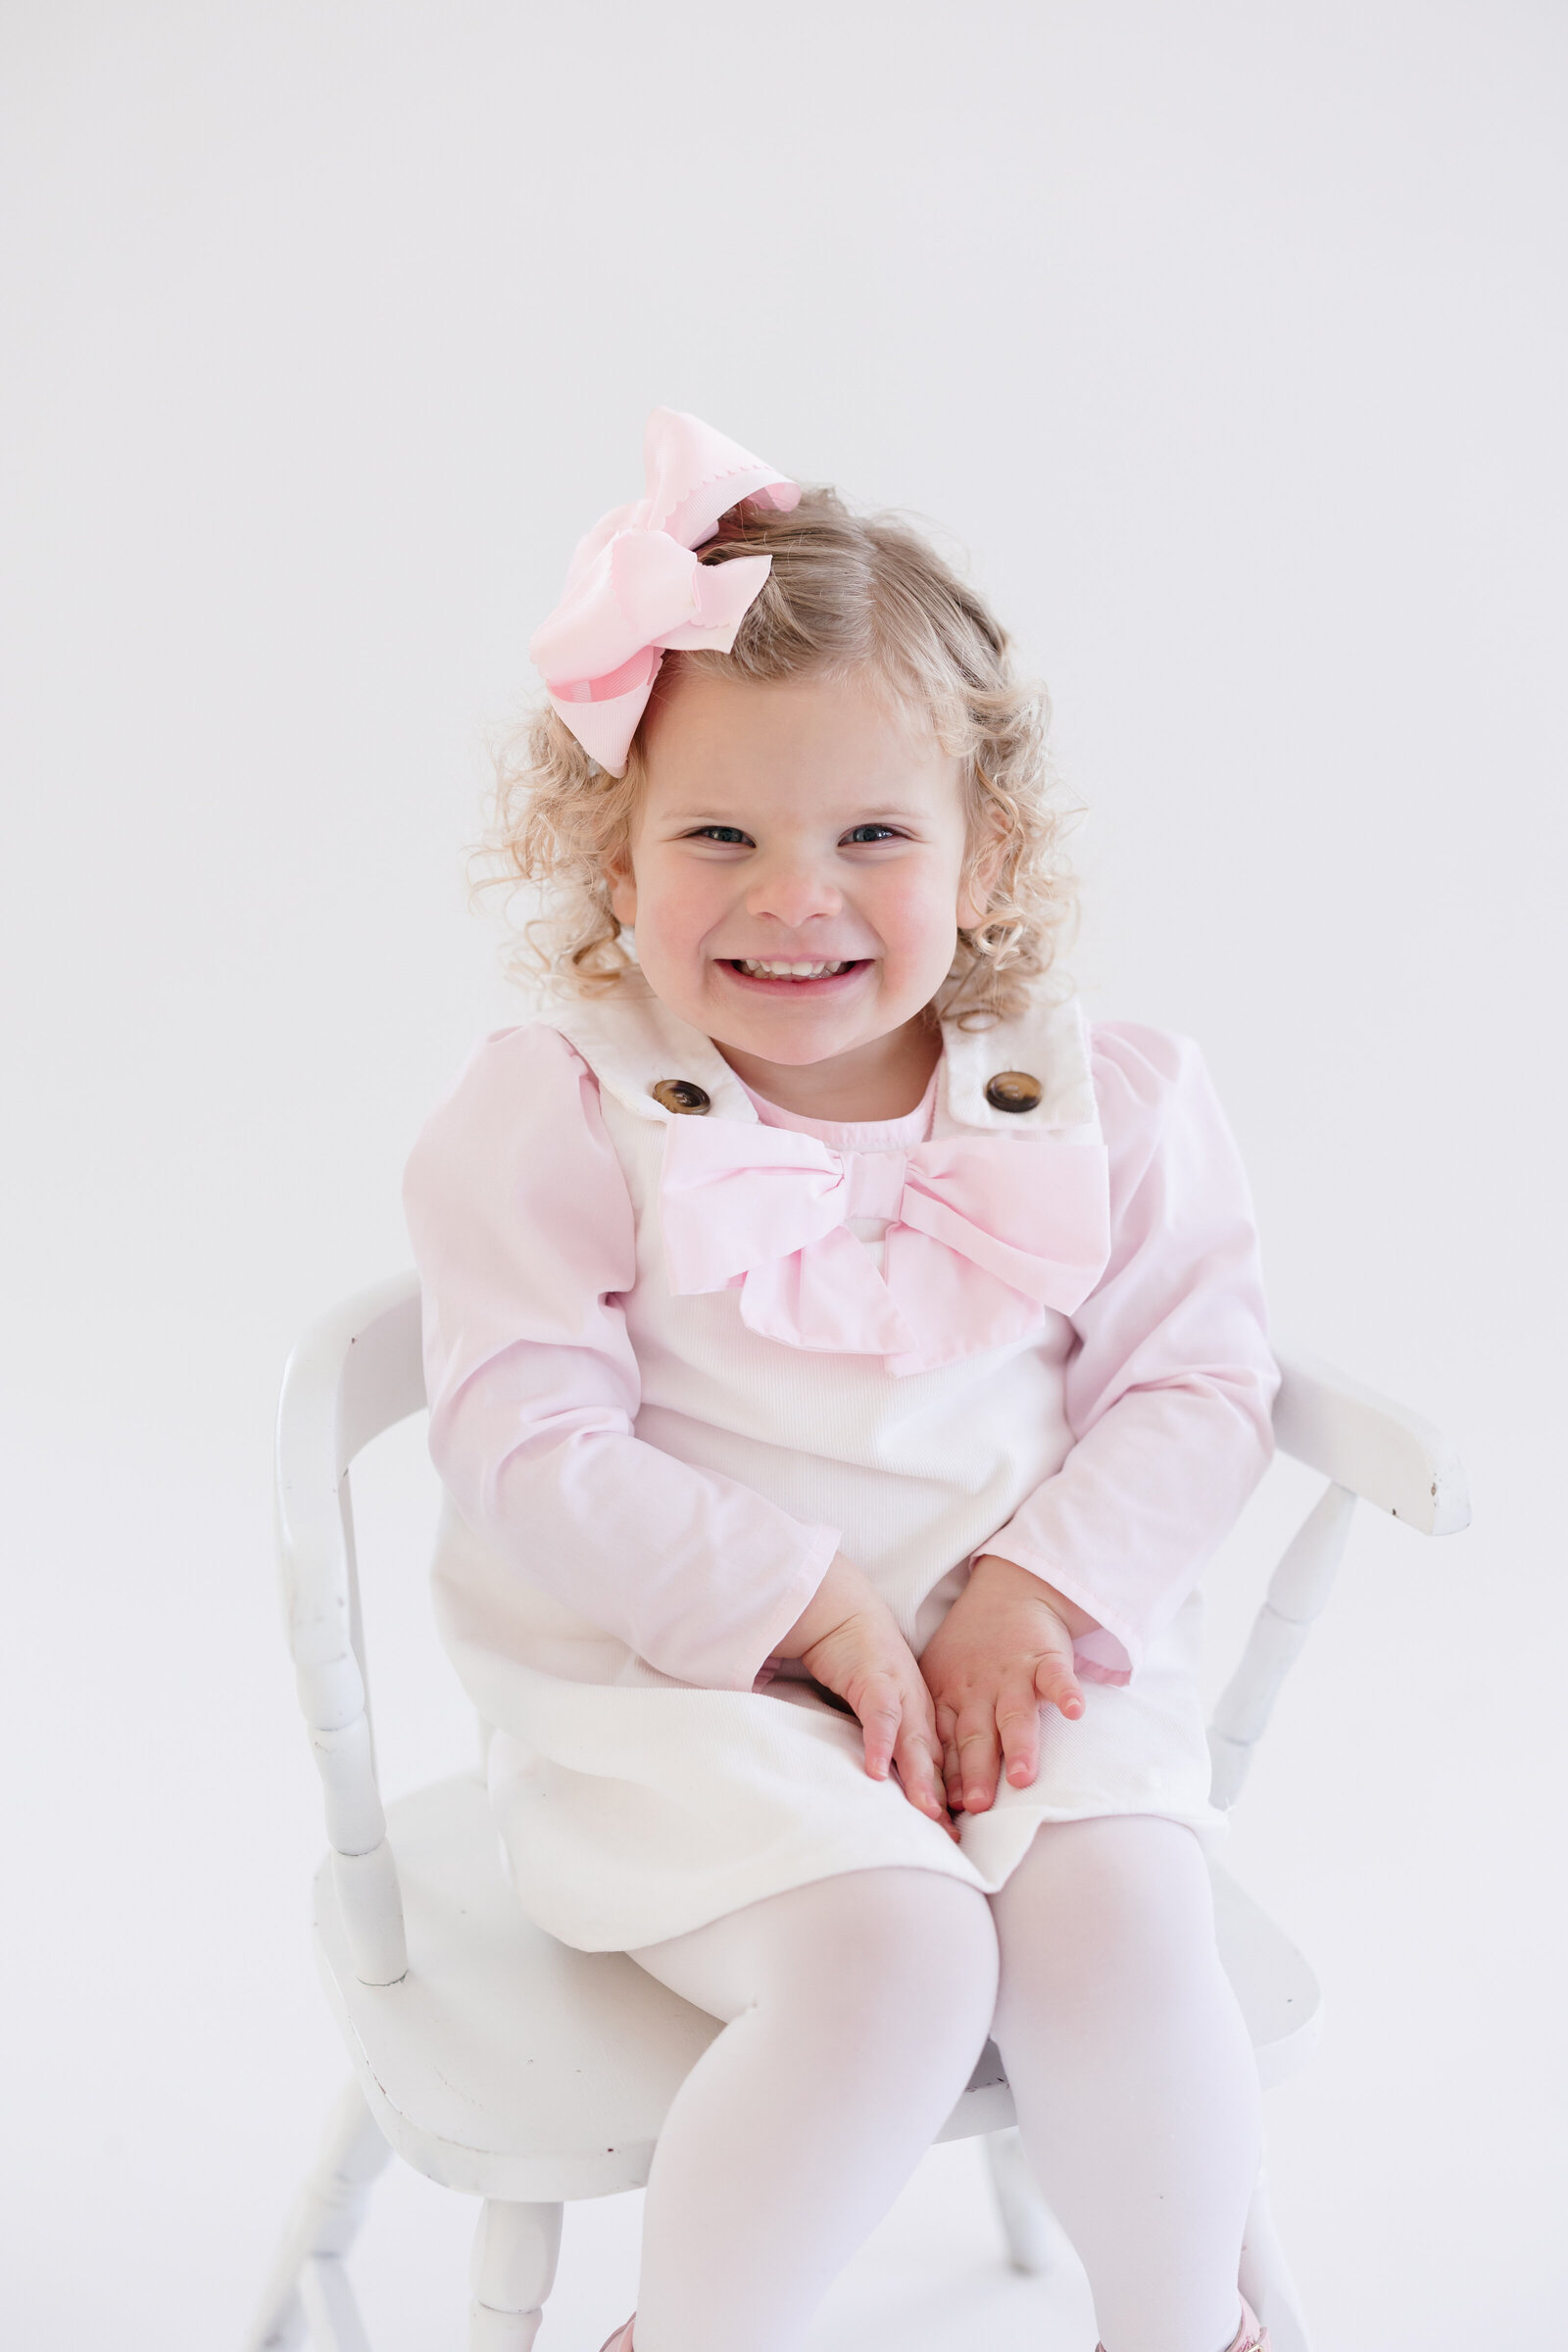 Little girl sitting on a white chair smiling at the camera